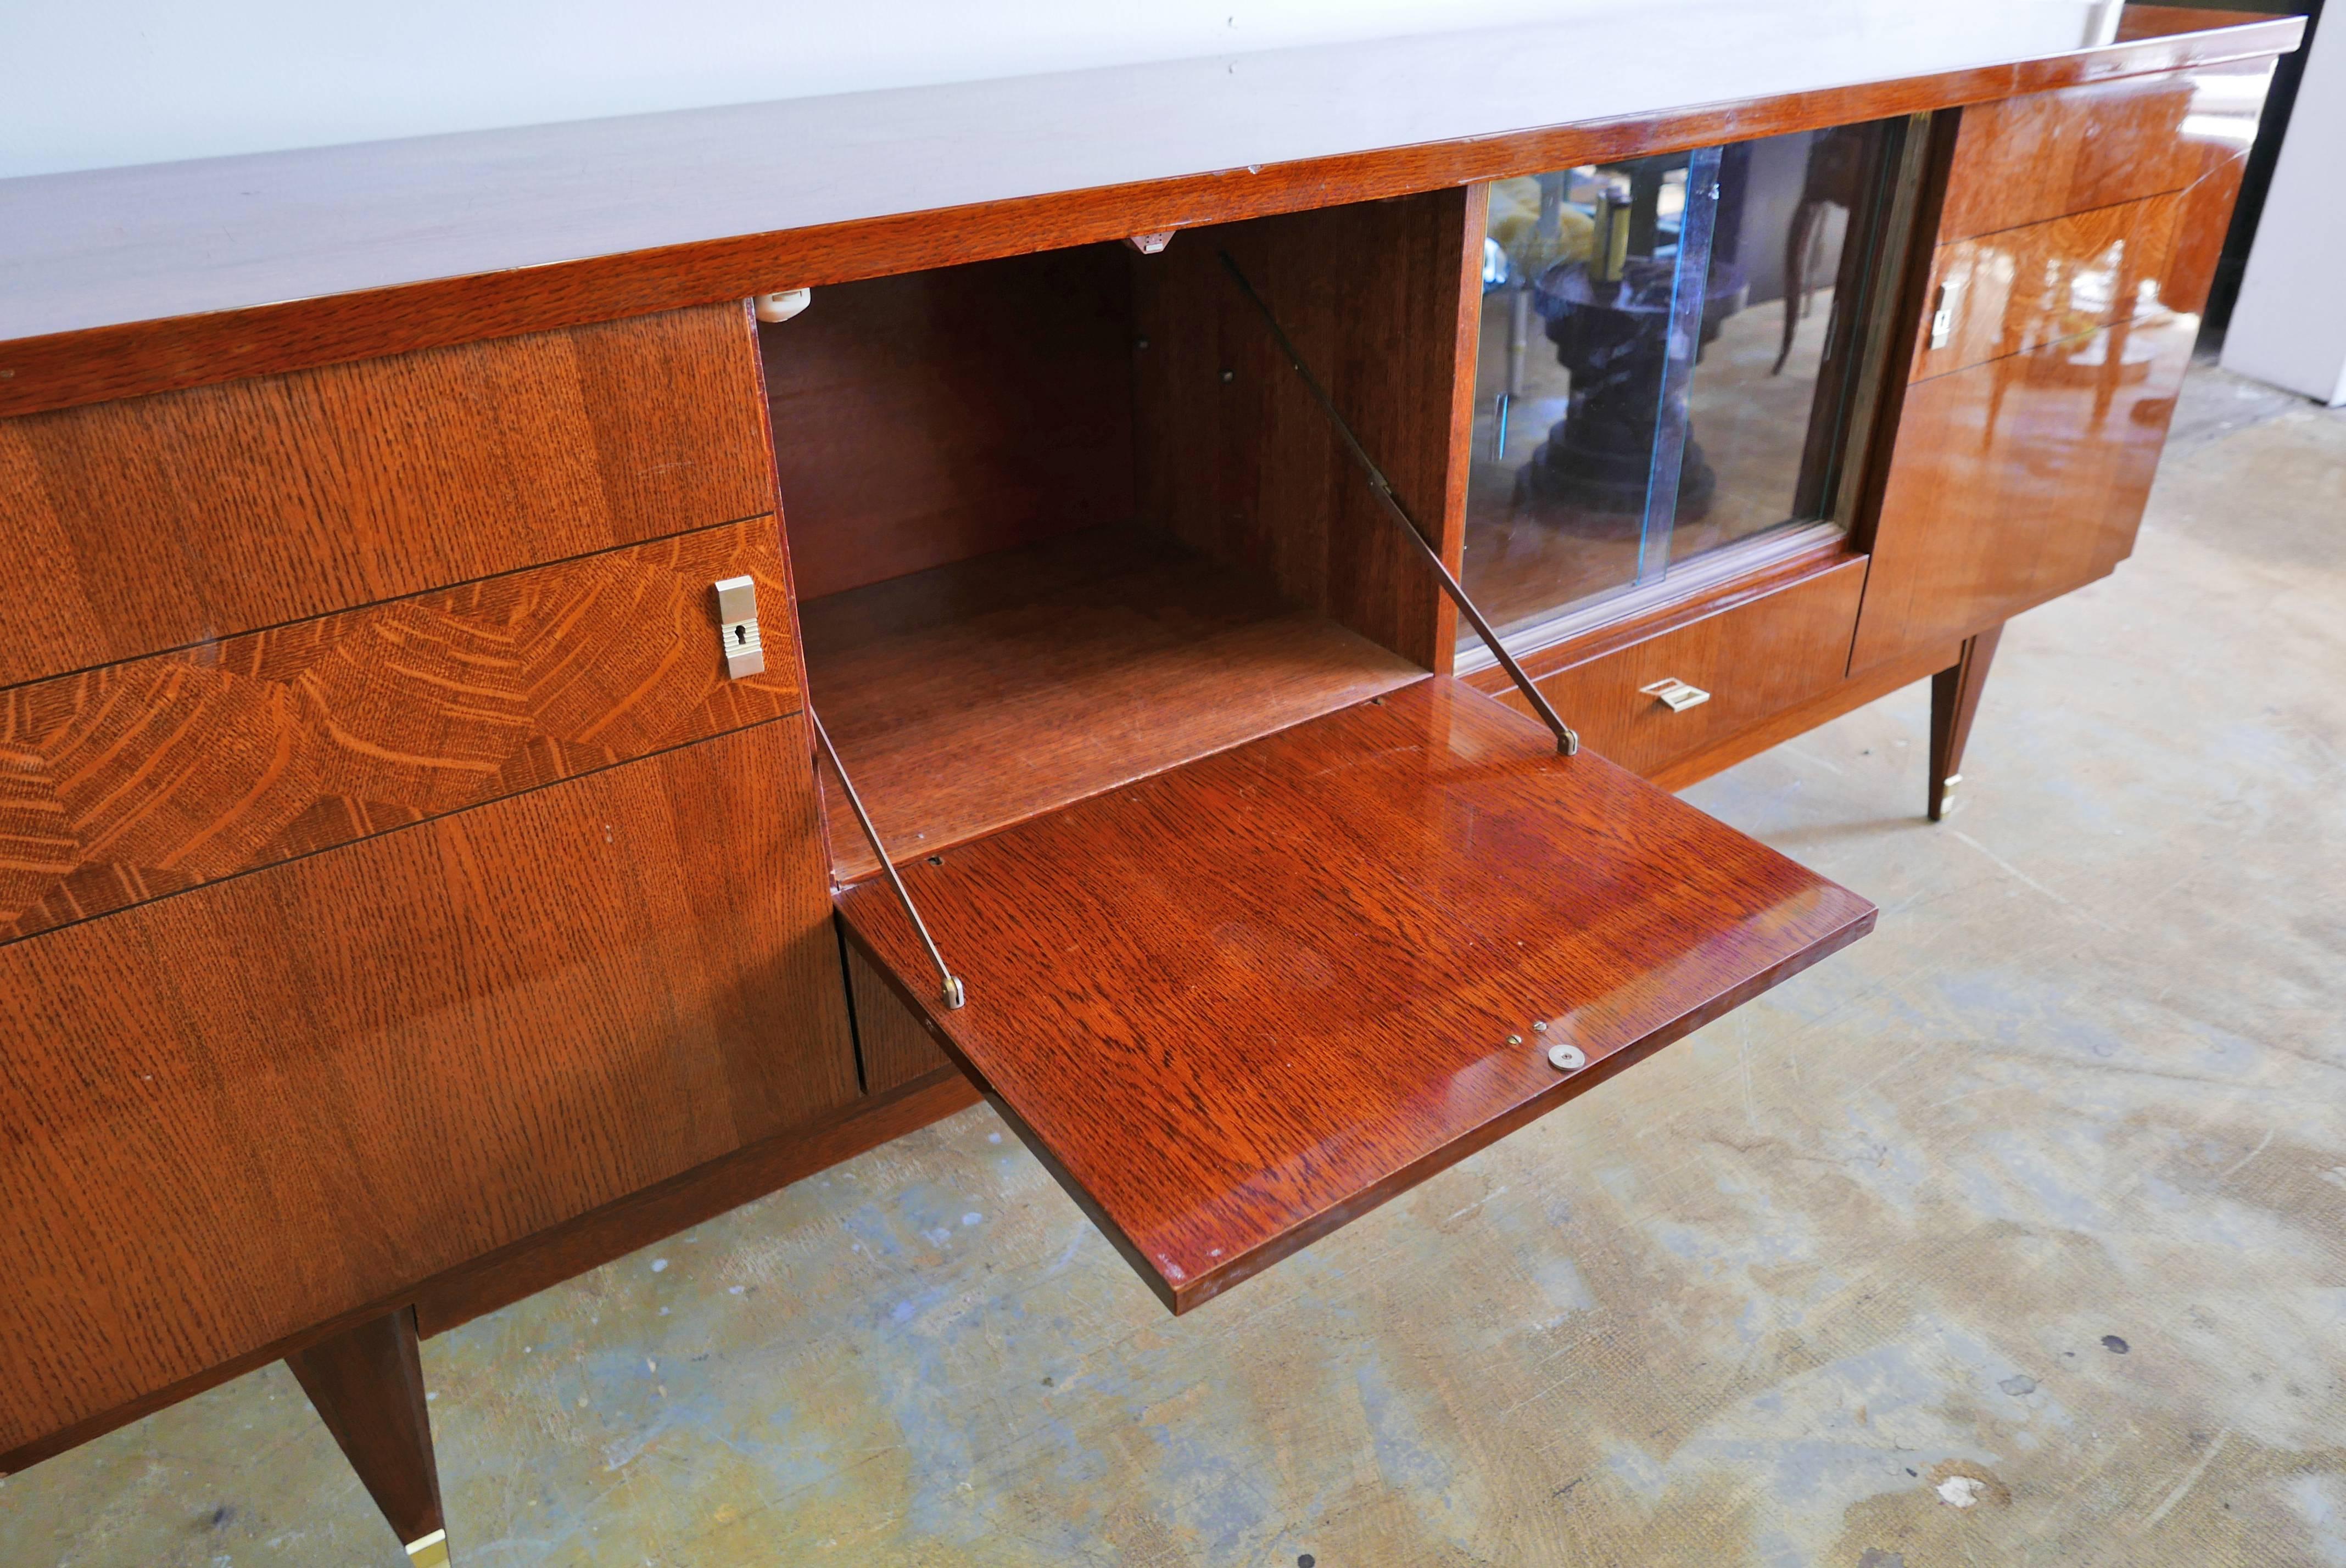 Mid-20th Century Credenza or Bar from France, 1930s Art Deco Period